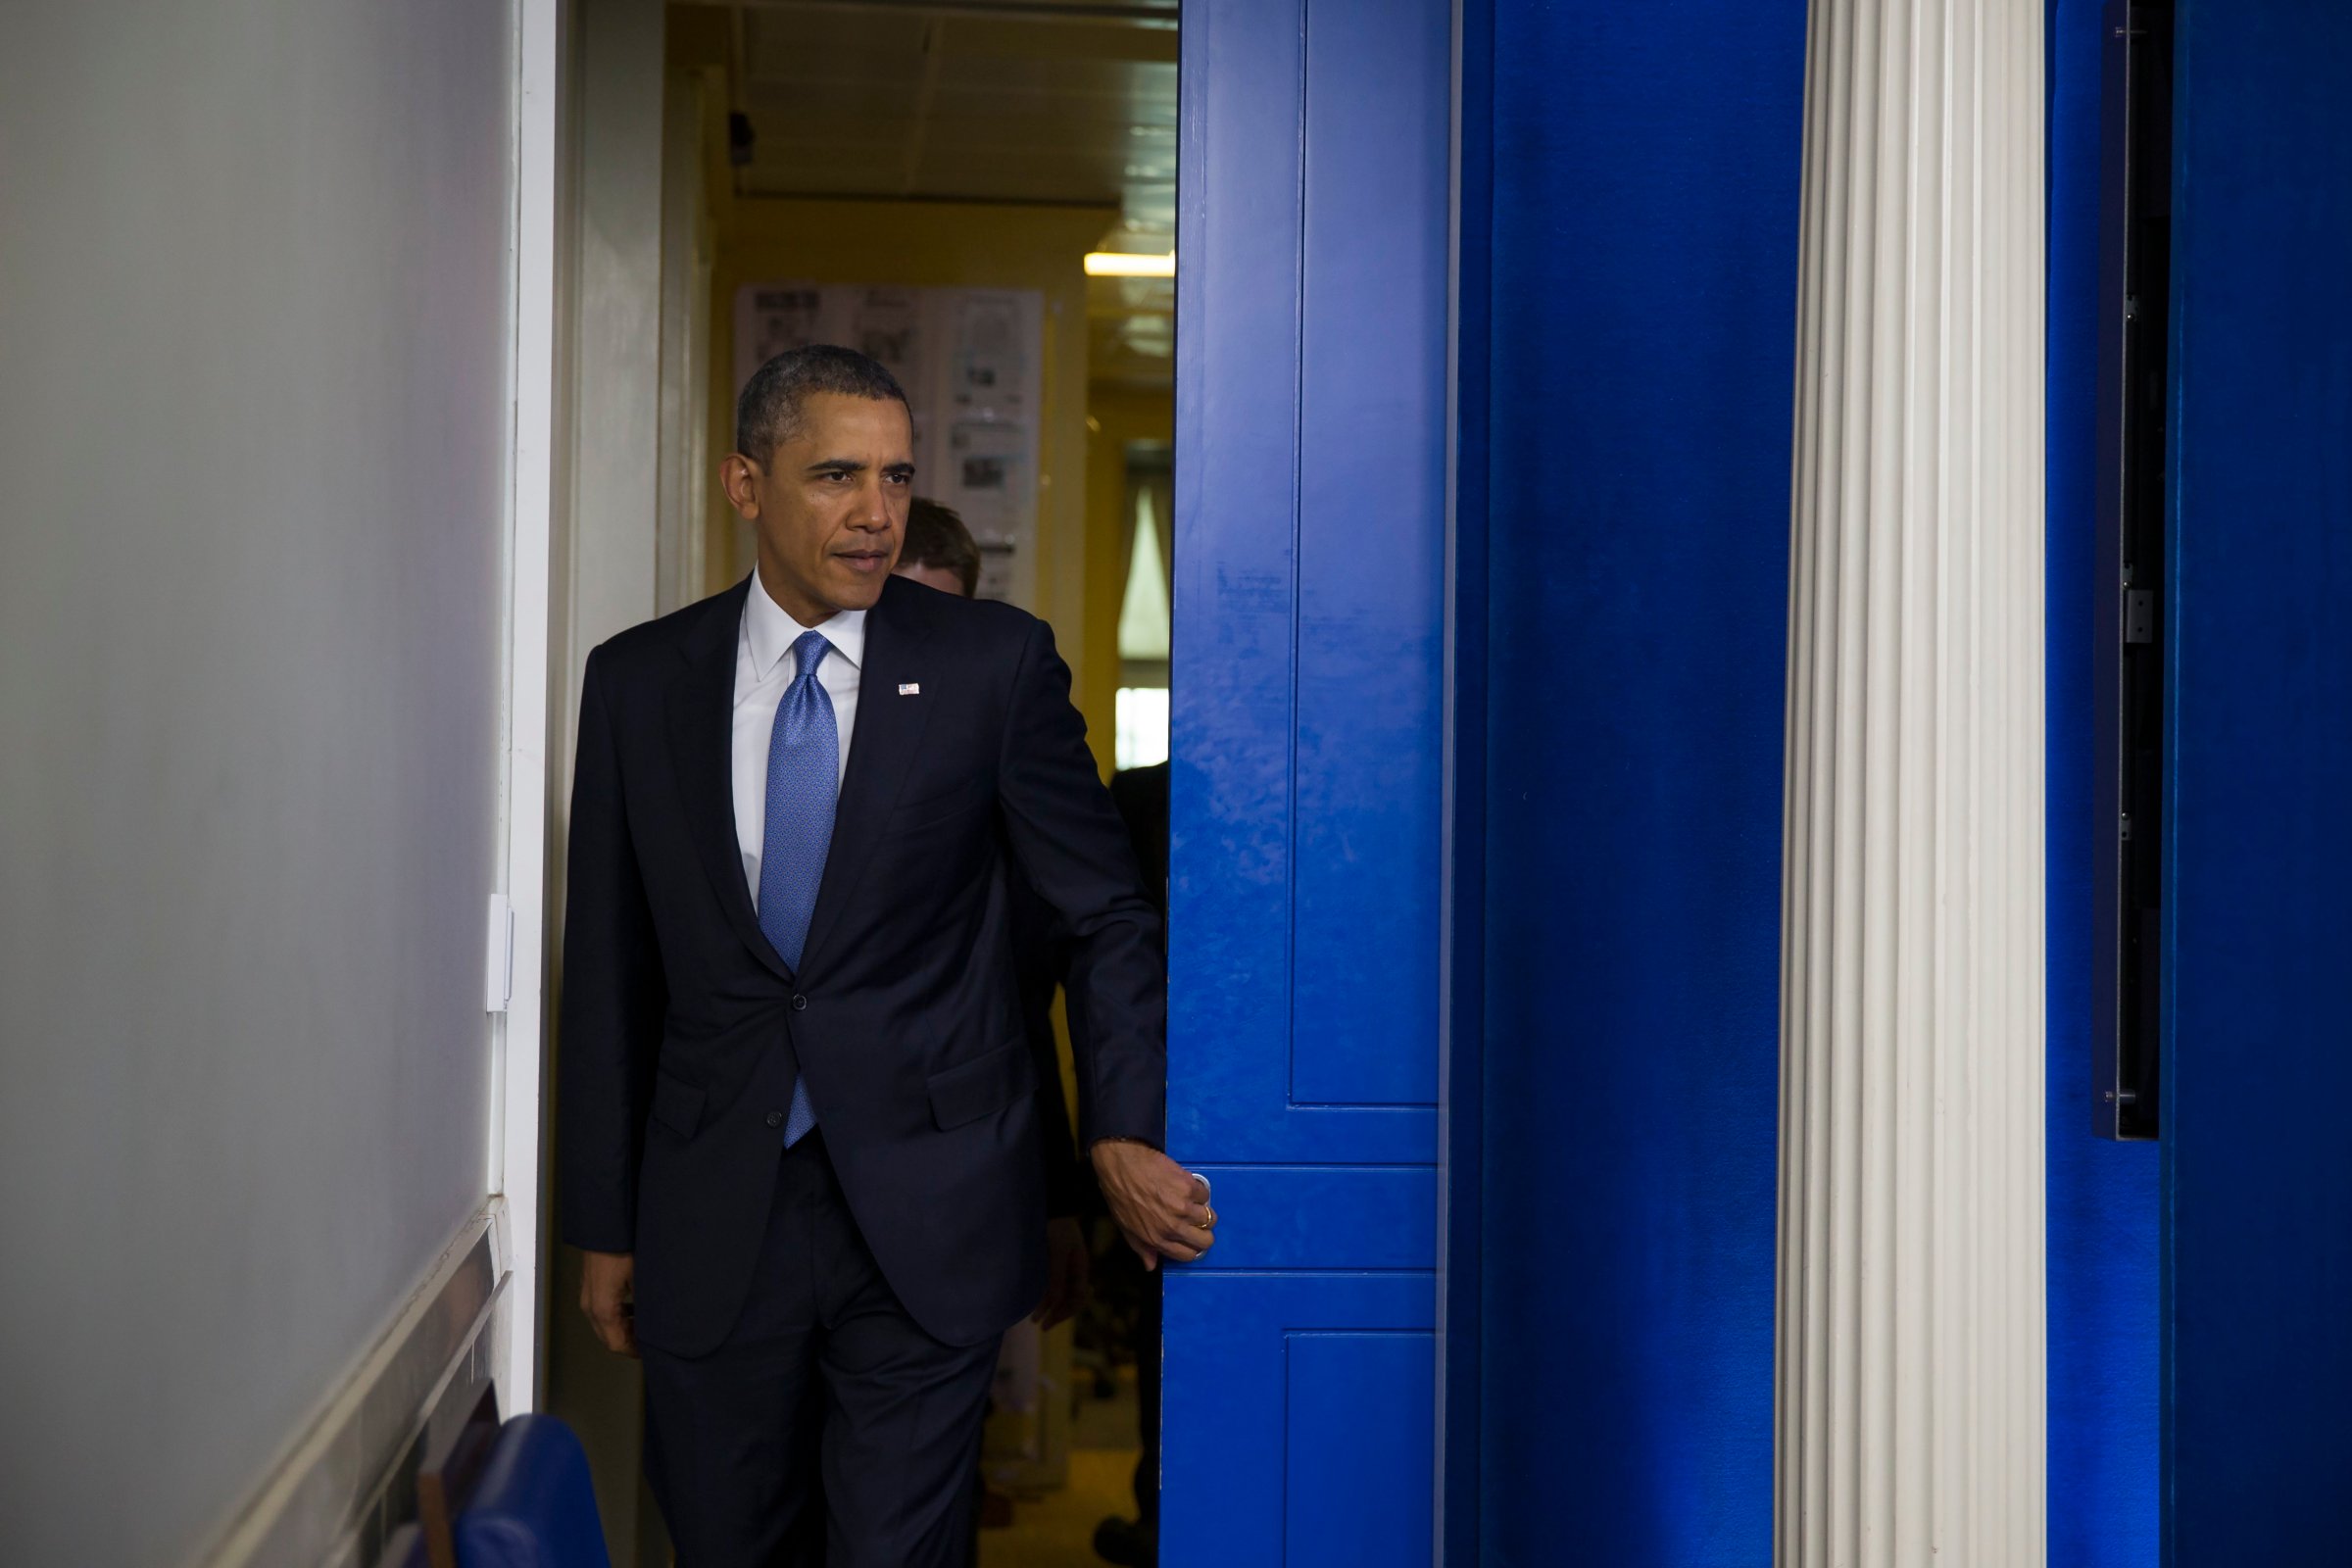 President Barack Obama arrives to deliver a statement on Ukraine from the White House in Washington